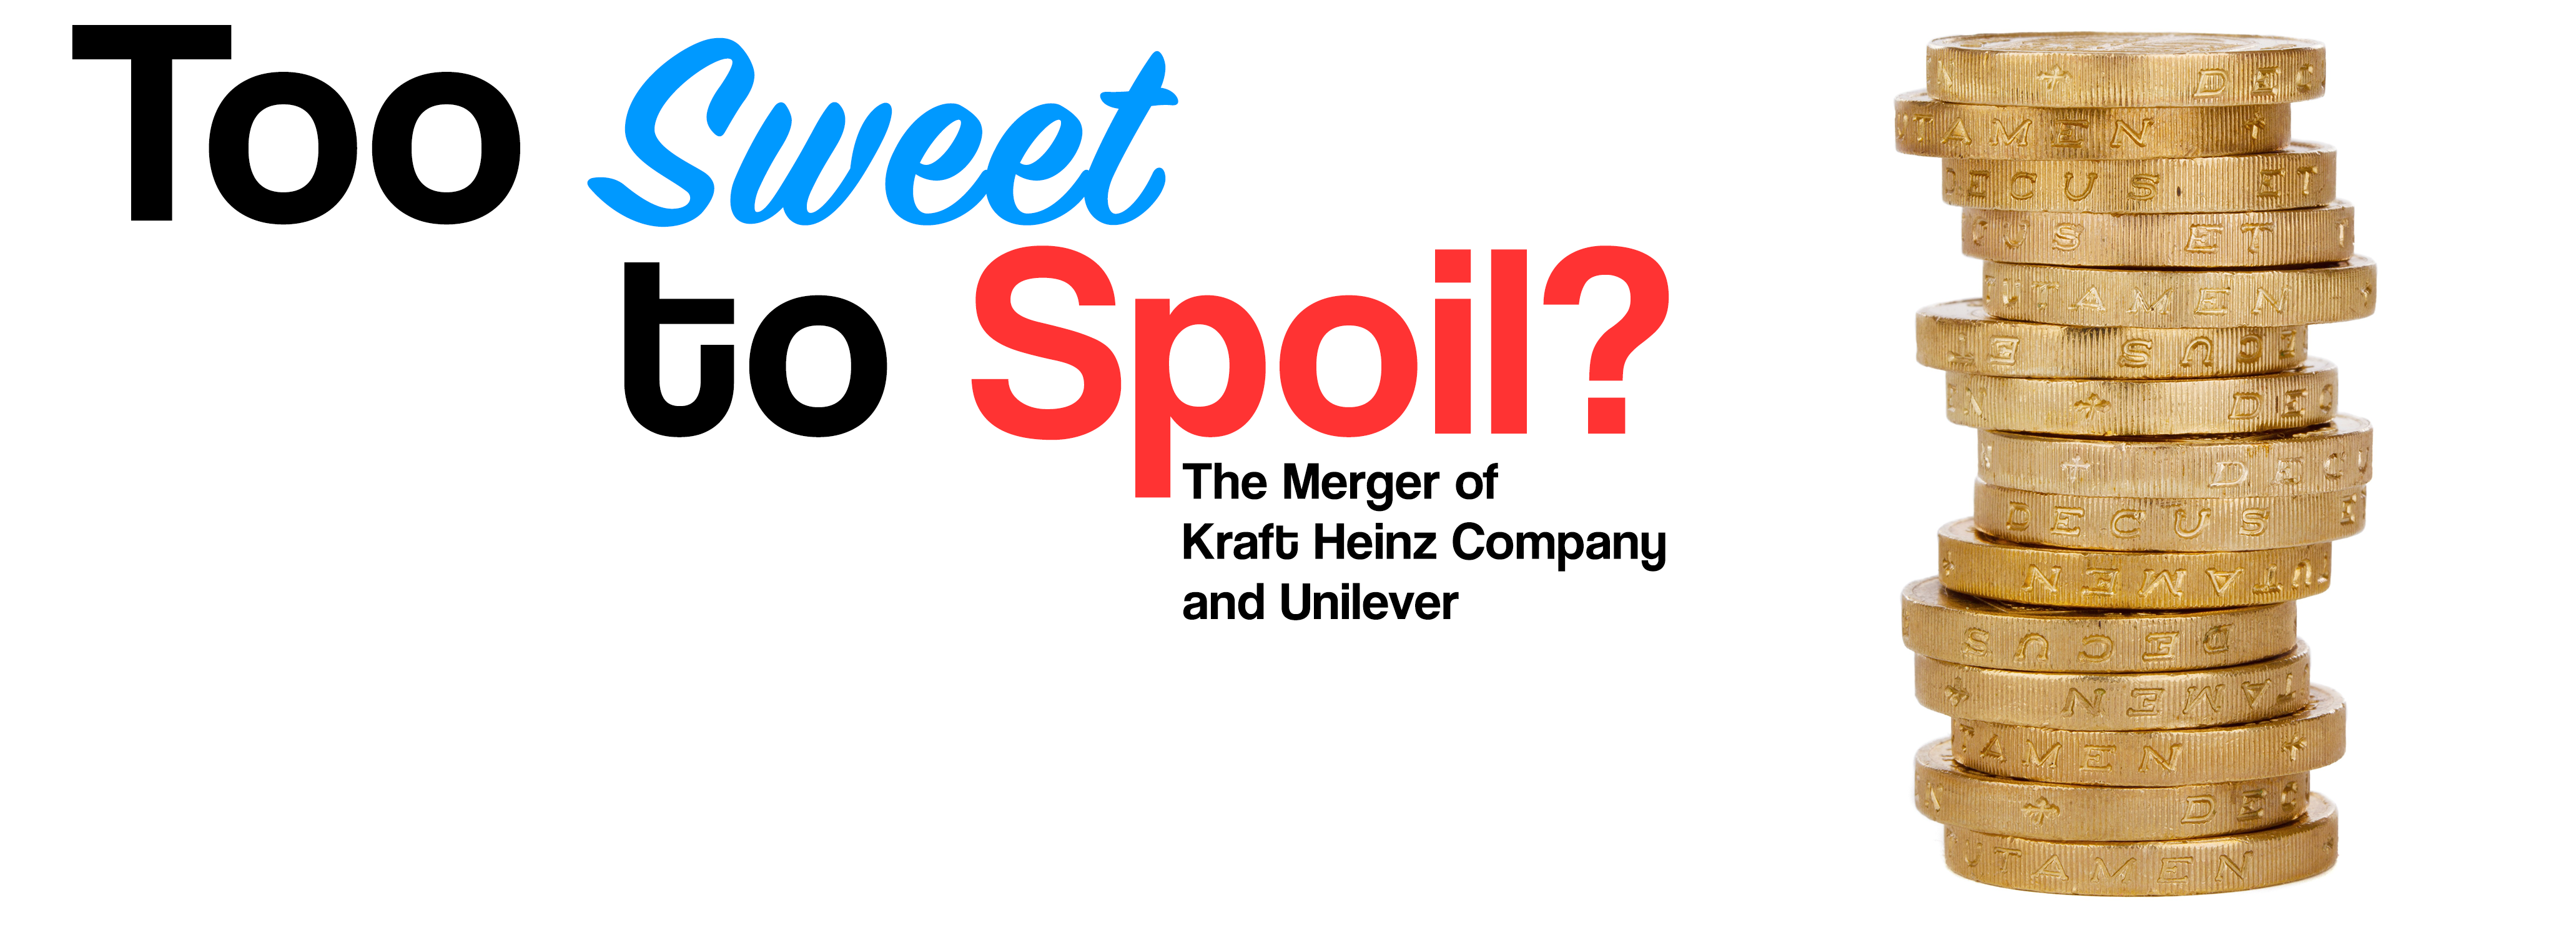 Too Sweet To Spoil? The Merger of Kraft Heinz Company and Unilever (WITH COUPONS!)